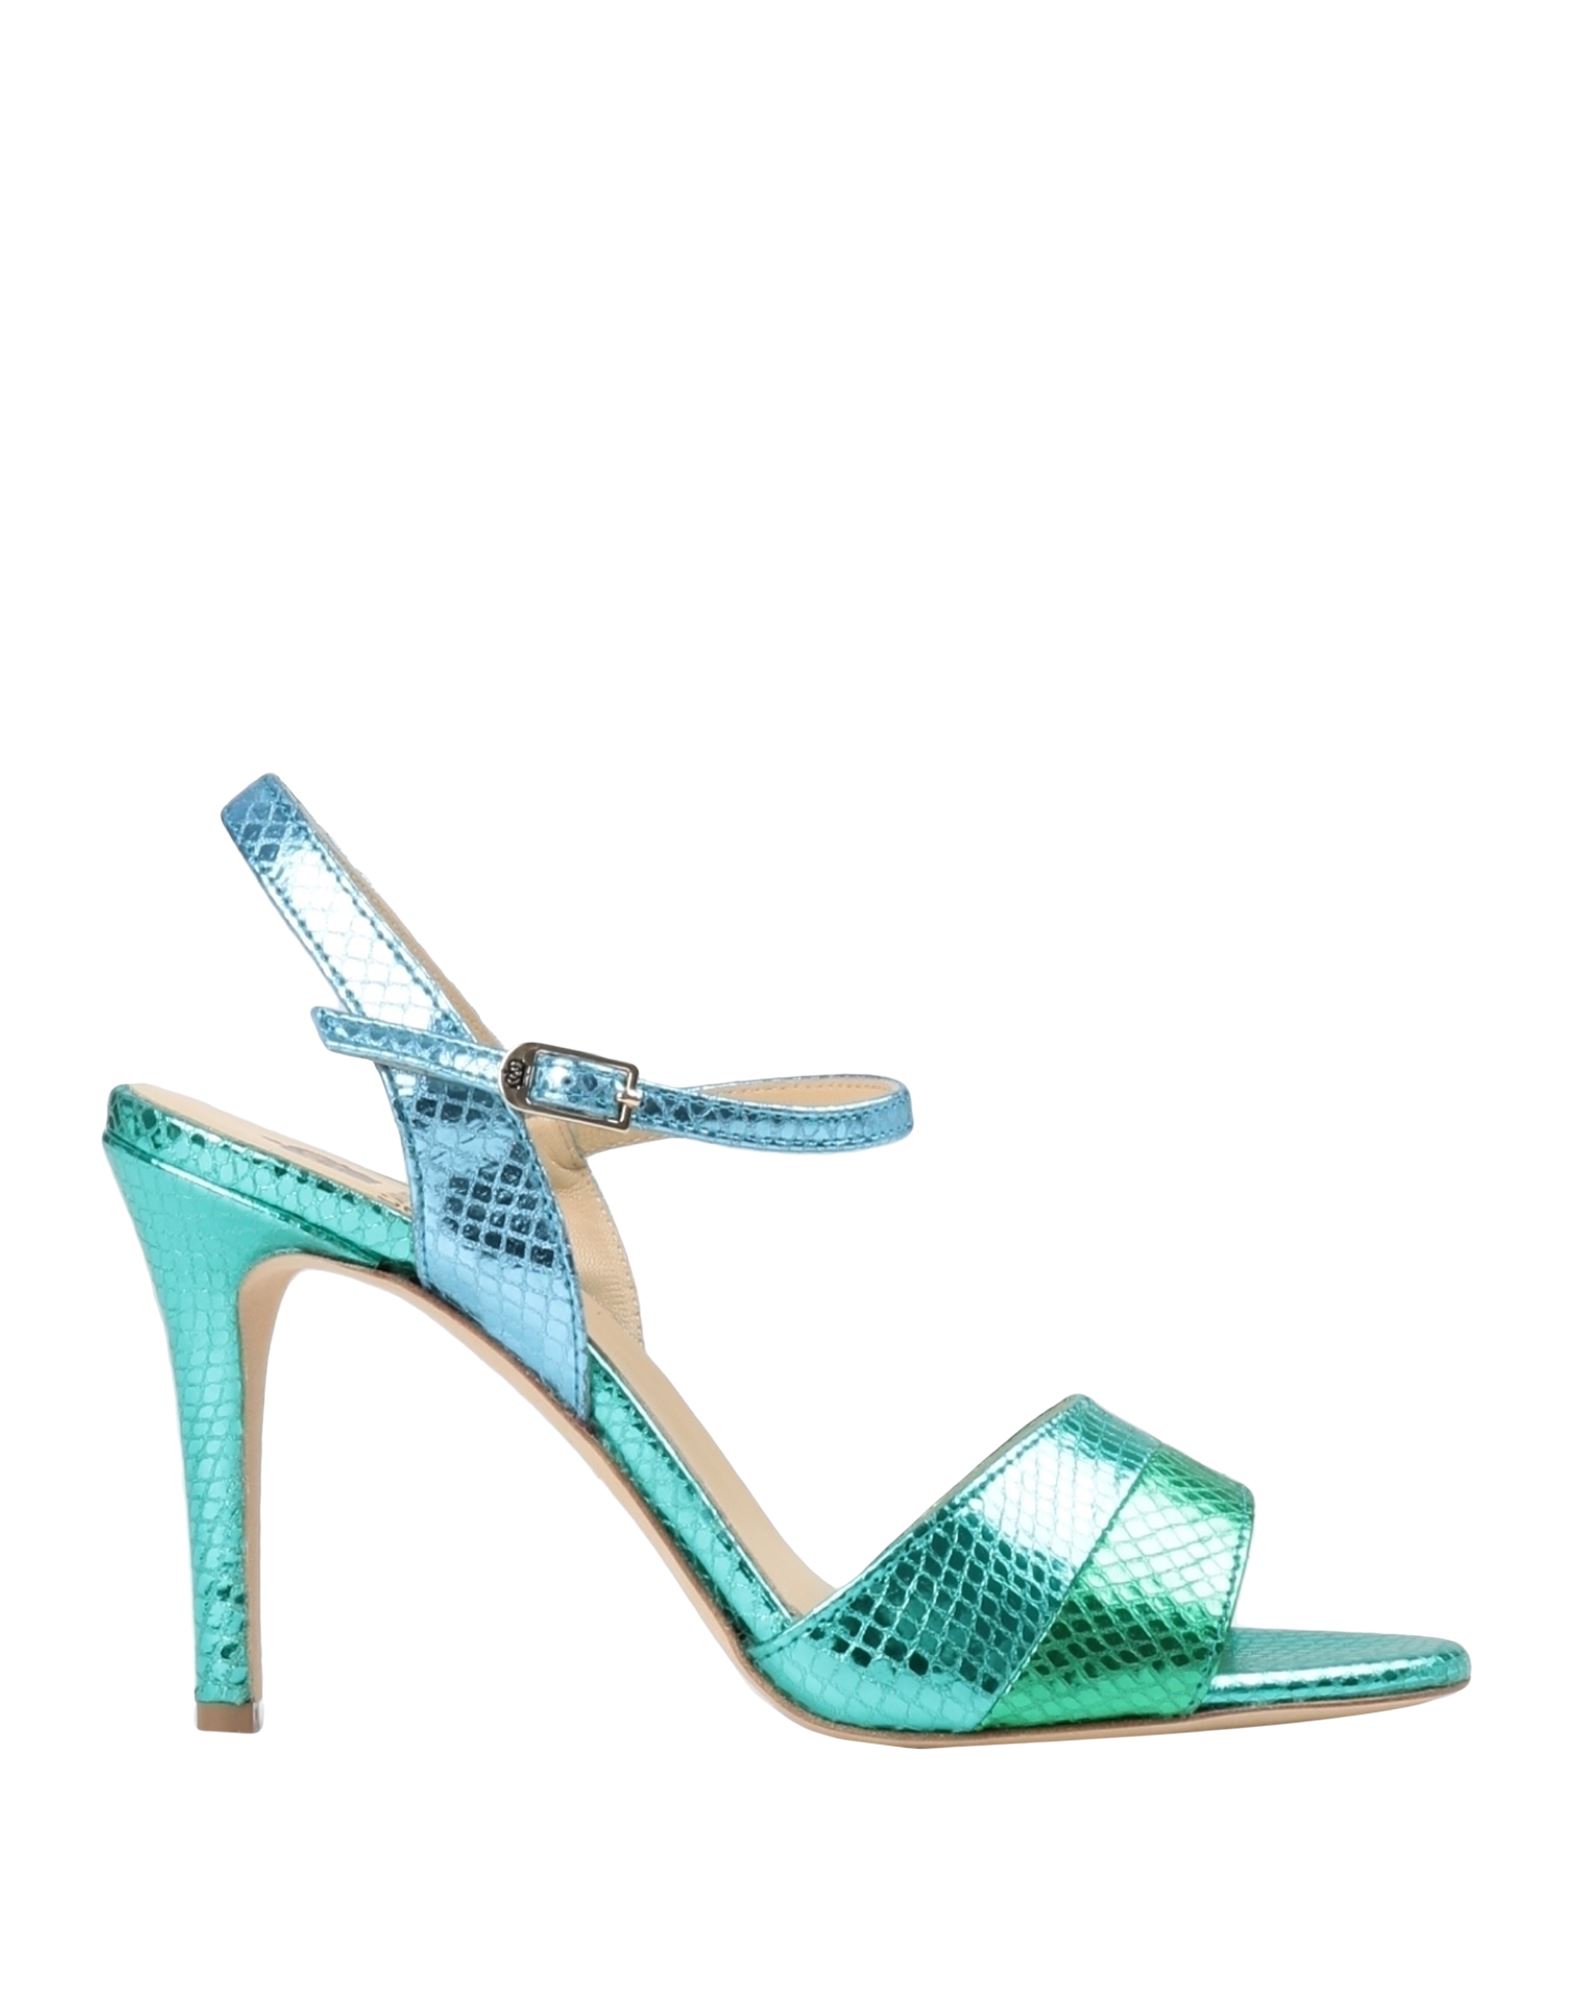 L'arianna Woman Sandals Turquoise Size 9 Soft Leather In Blue